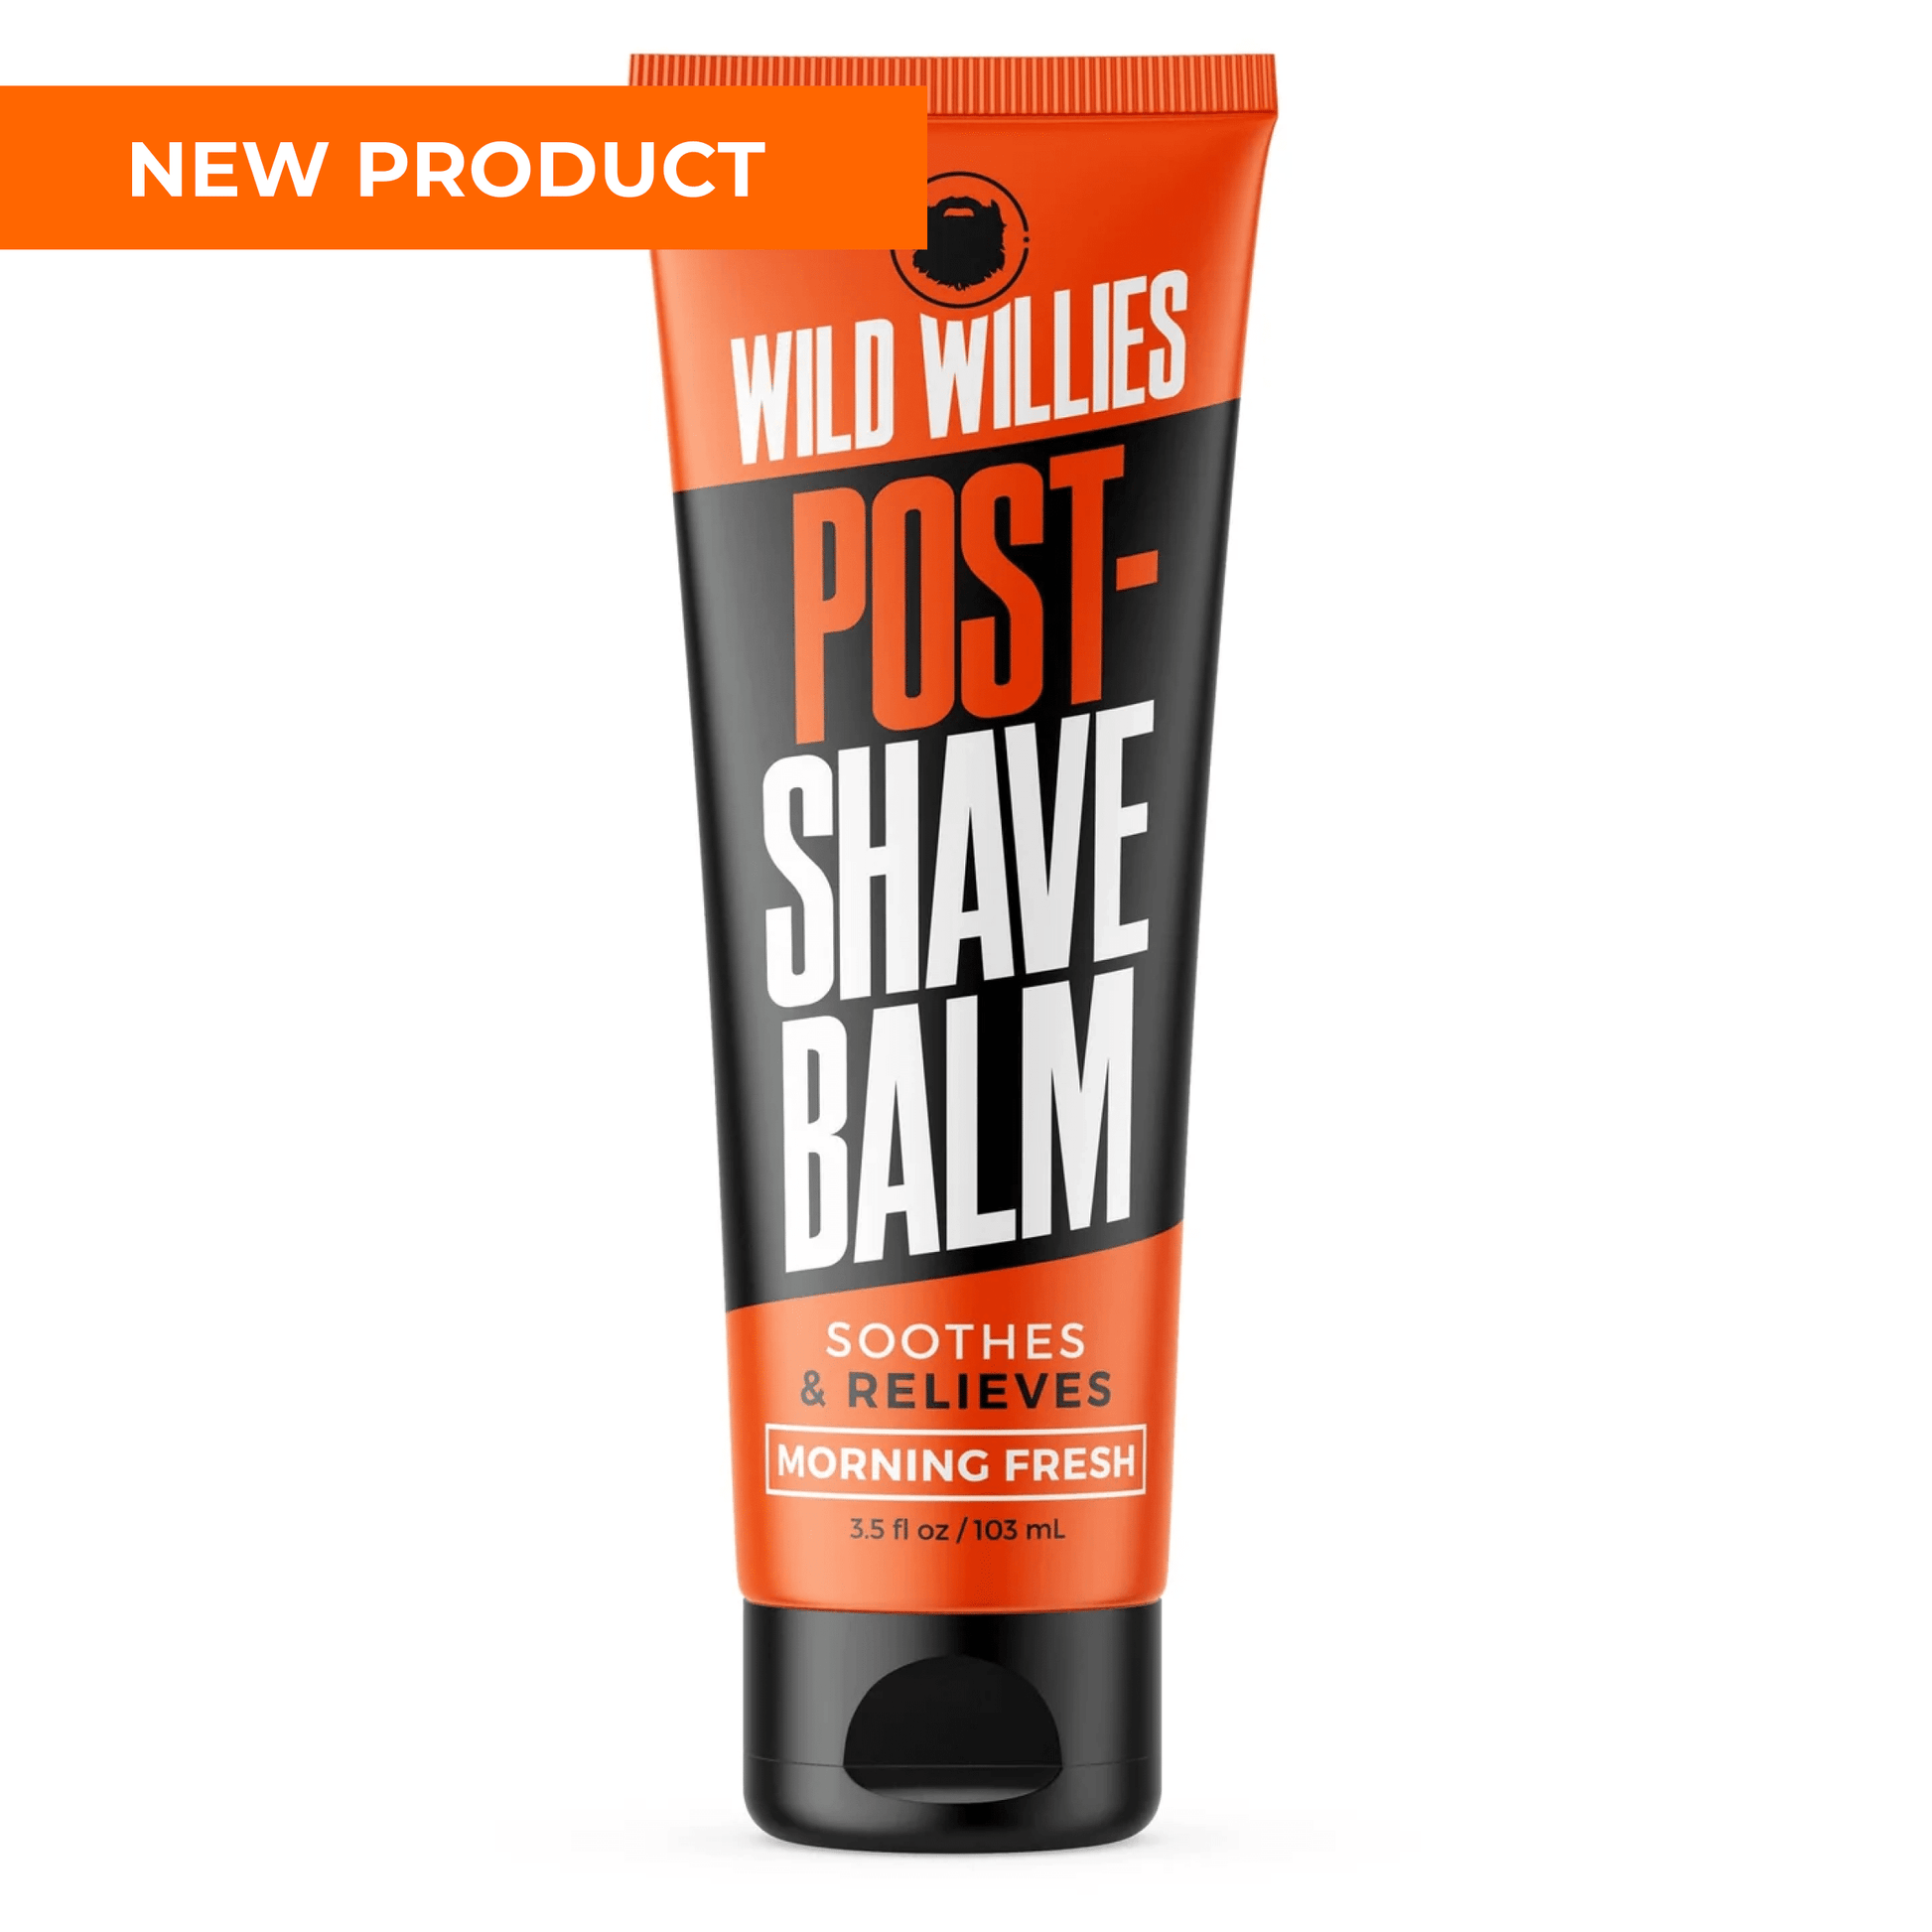 Post Shave Balm Health & Beauty Wild Willies Morning Fresh 